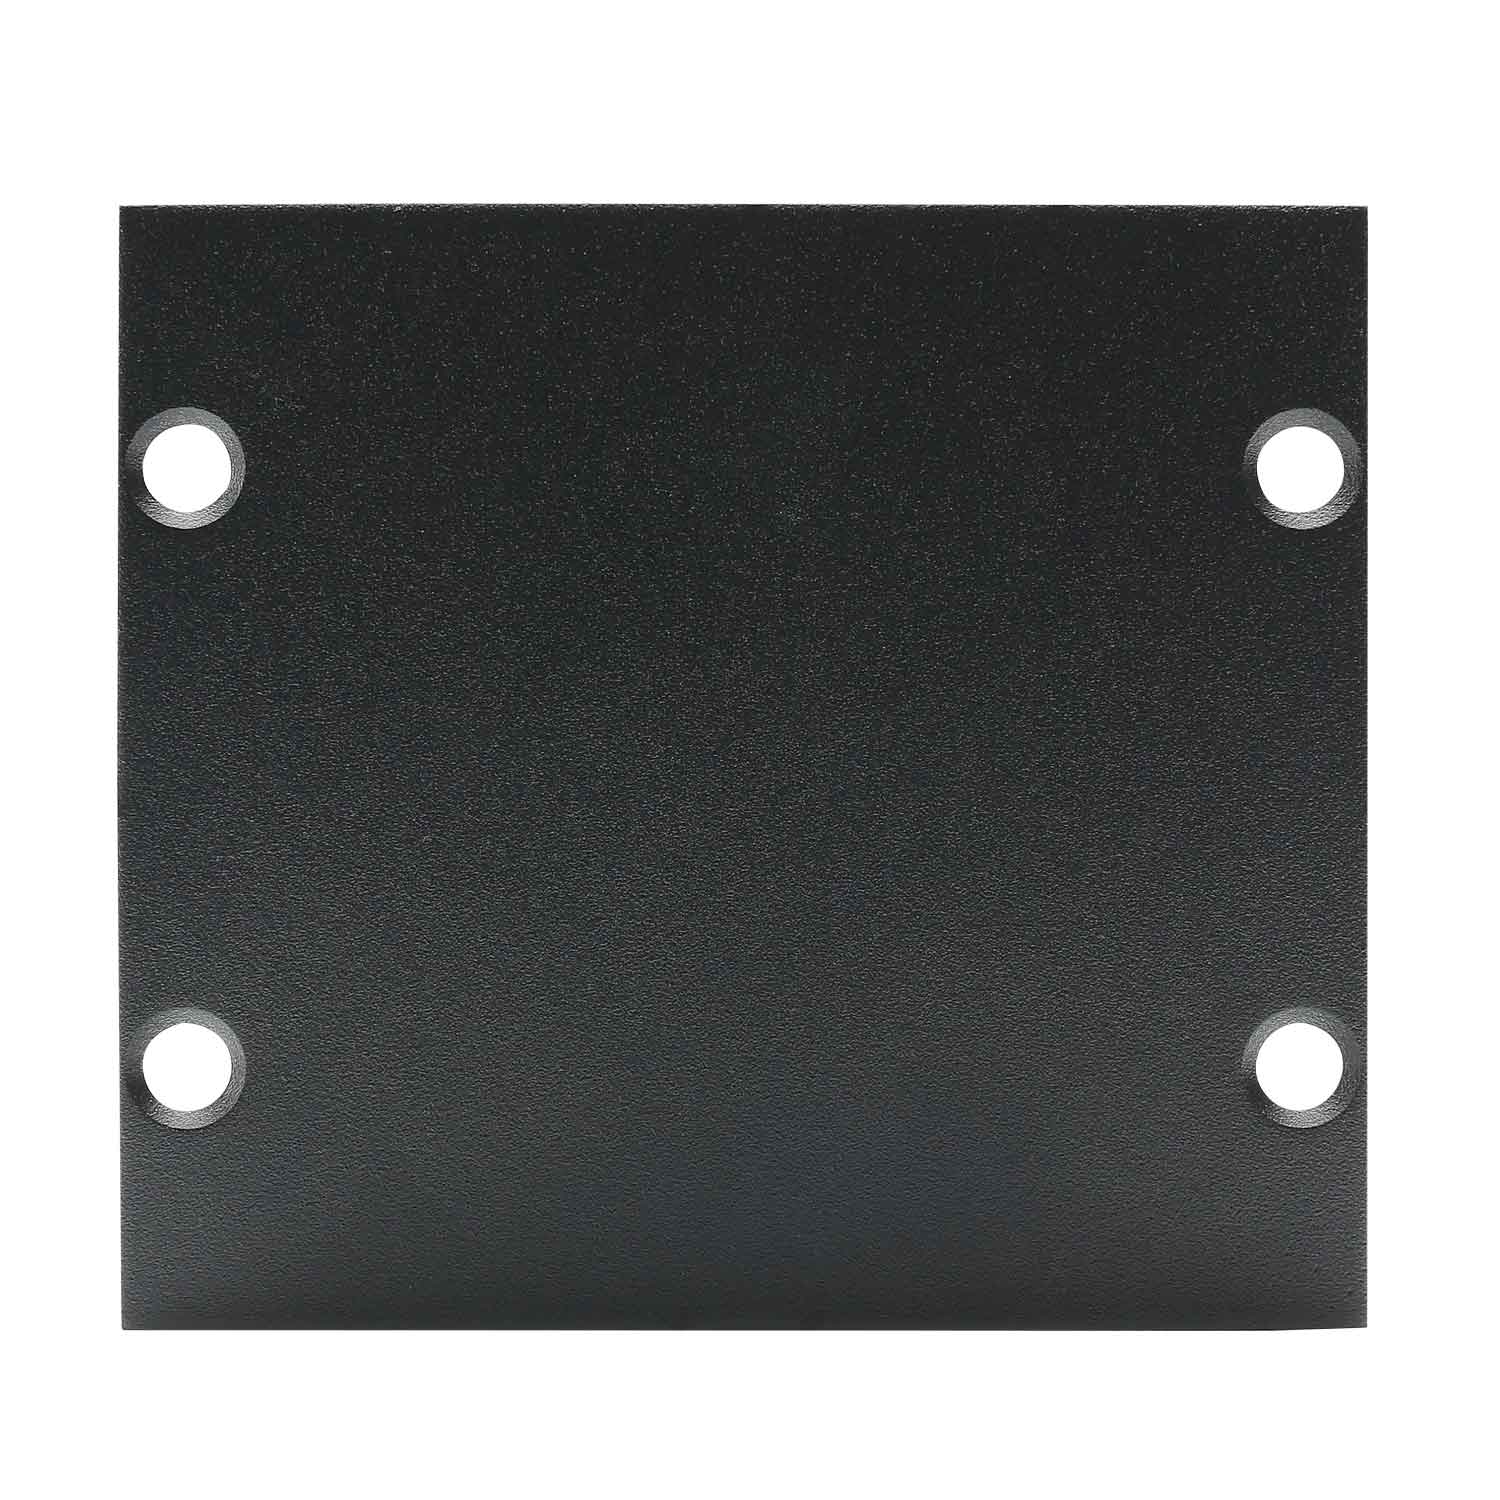 Side panel blank panel, 2 HE, 1 BE; depth: 80 mm for SYSBOXX, colour: grey